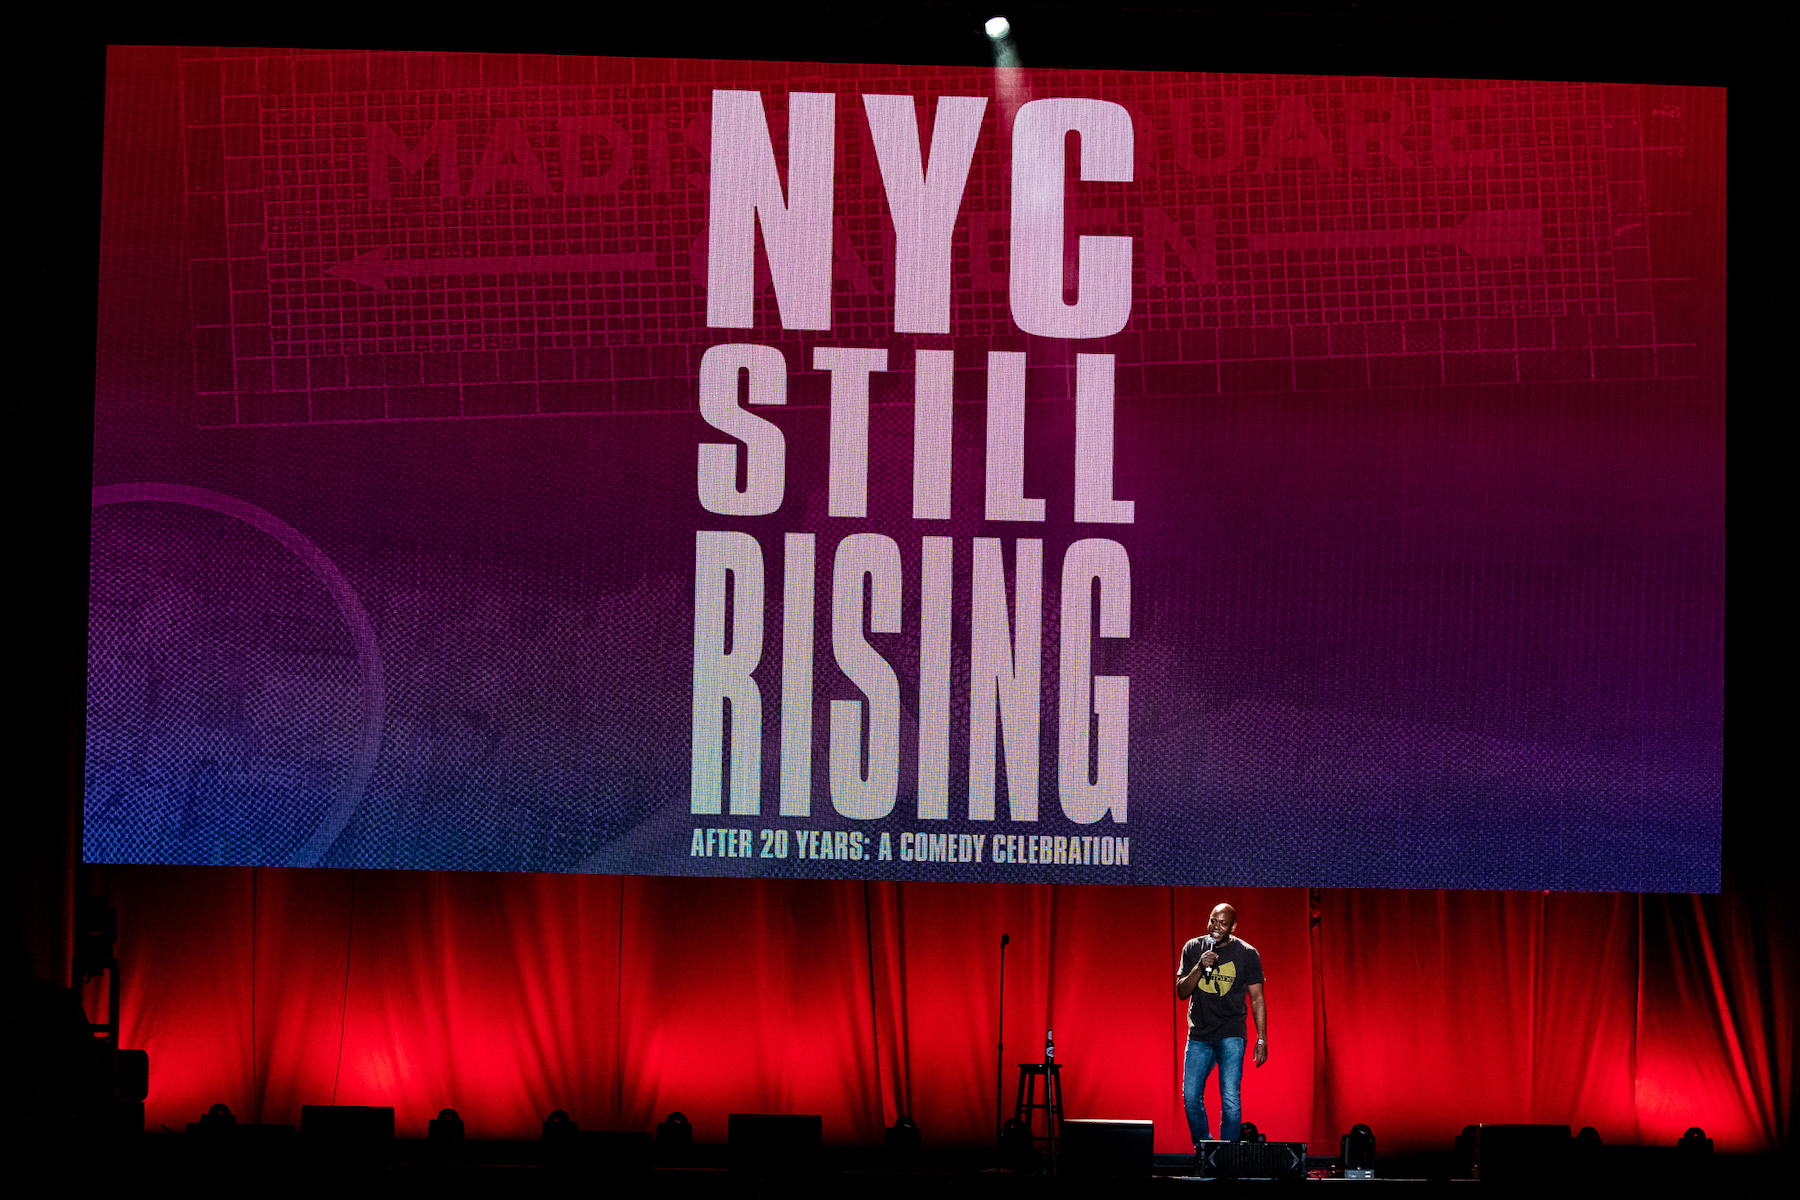 Photo 15 in 'NYC STILL RISING After 20 years:  A Comedy Celebration' gallery showcasing lighting design by Mike Baldassari of Mike-O-Matic Industries LLC